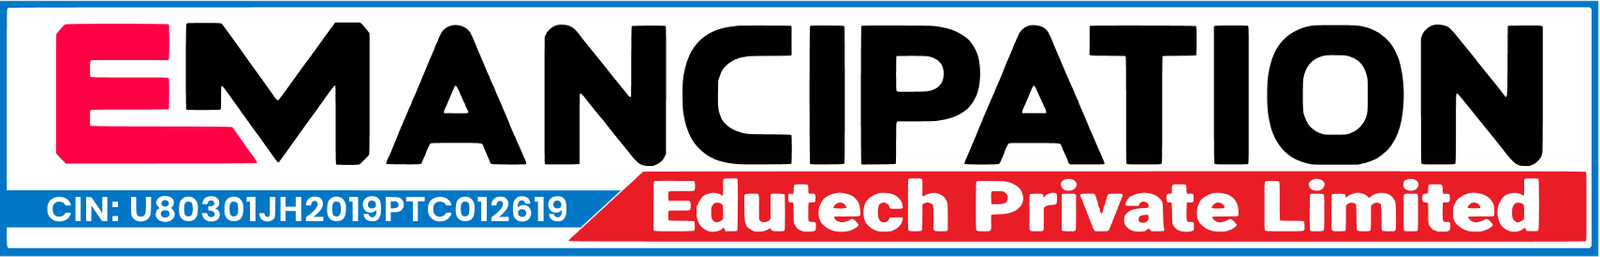 Emancipation Edutech Private Limited: Top Training Classes, Internship, and Projects in Programming, Python Data Science, and Analysis for Students.